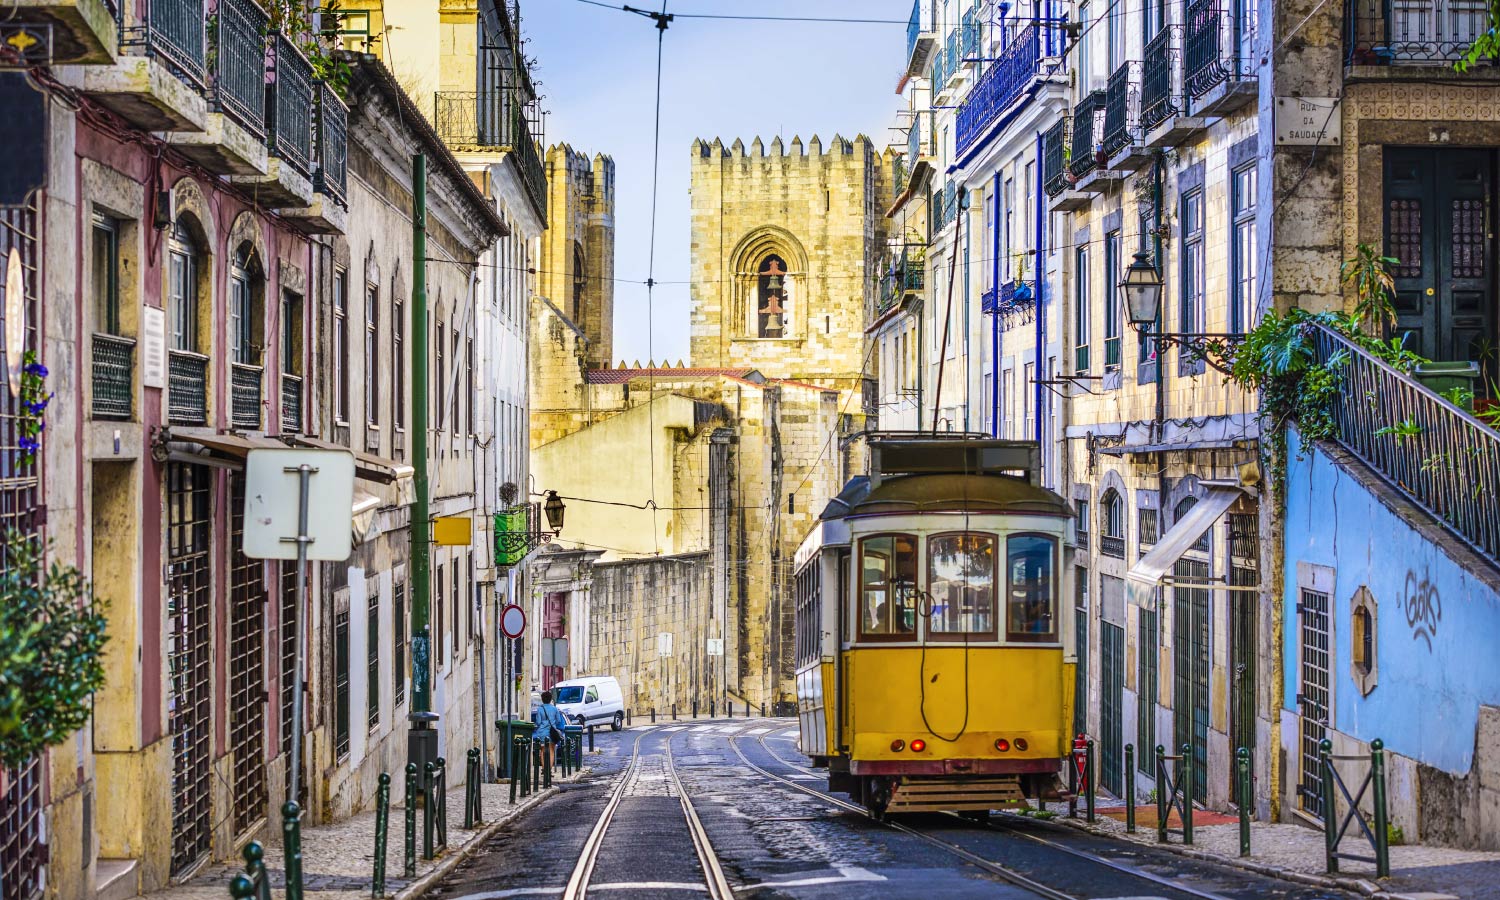 Find the best accommodations & places to stay in Lisboa - CuddlyNest.